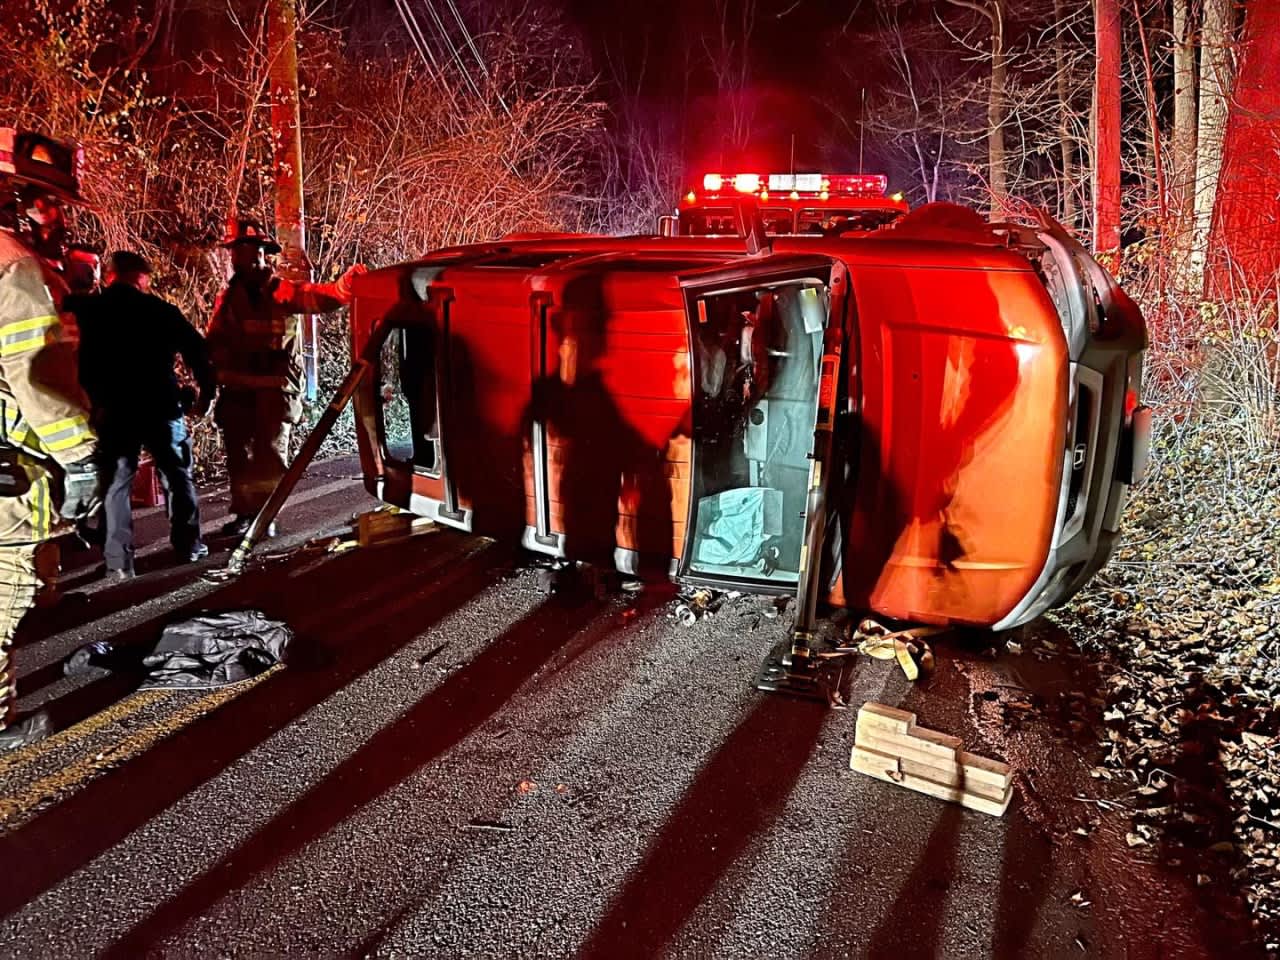 One person had to be rescued after they were trapped inside an overturned vehicle in Yorktown.